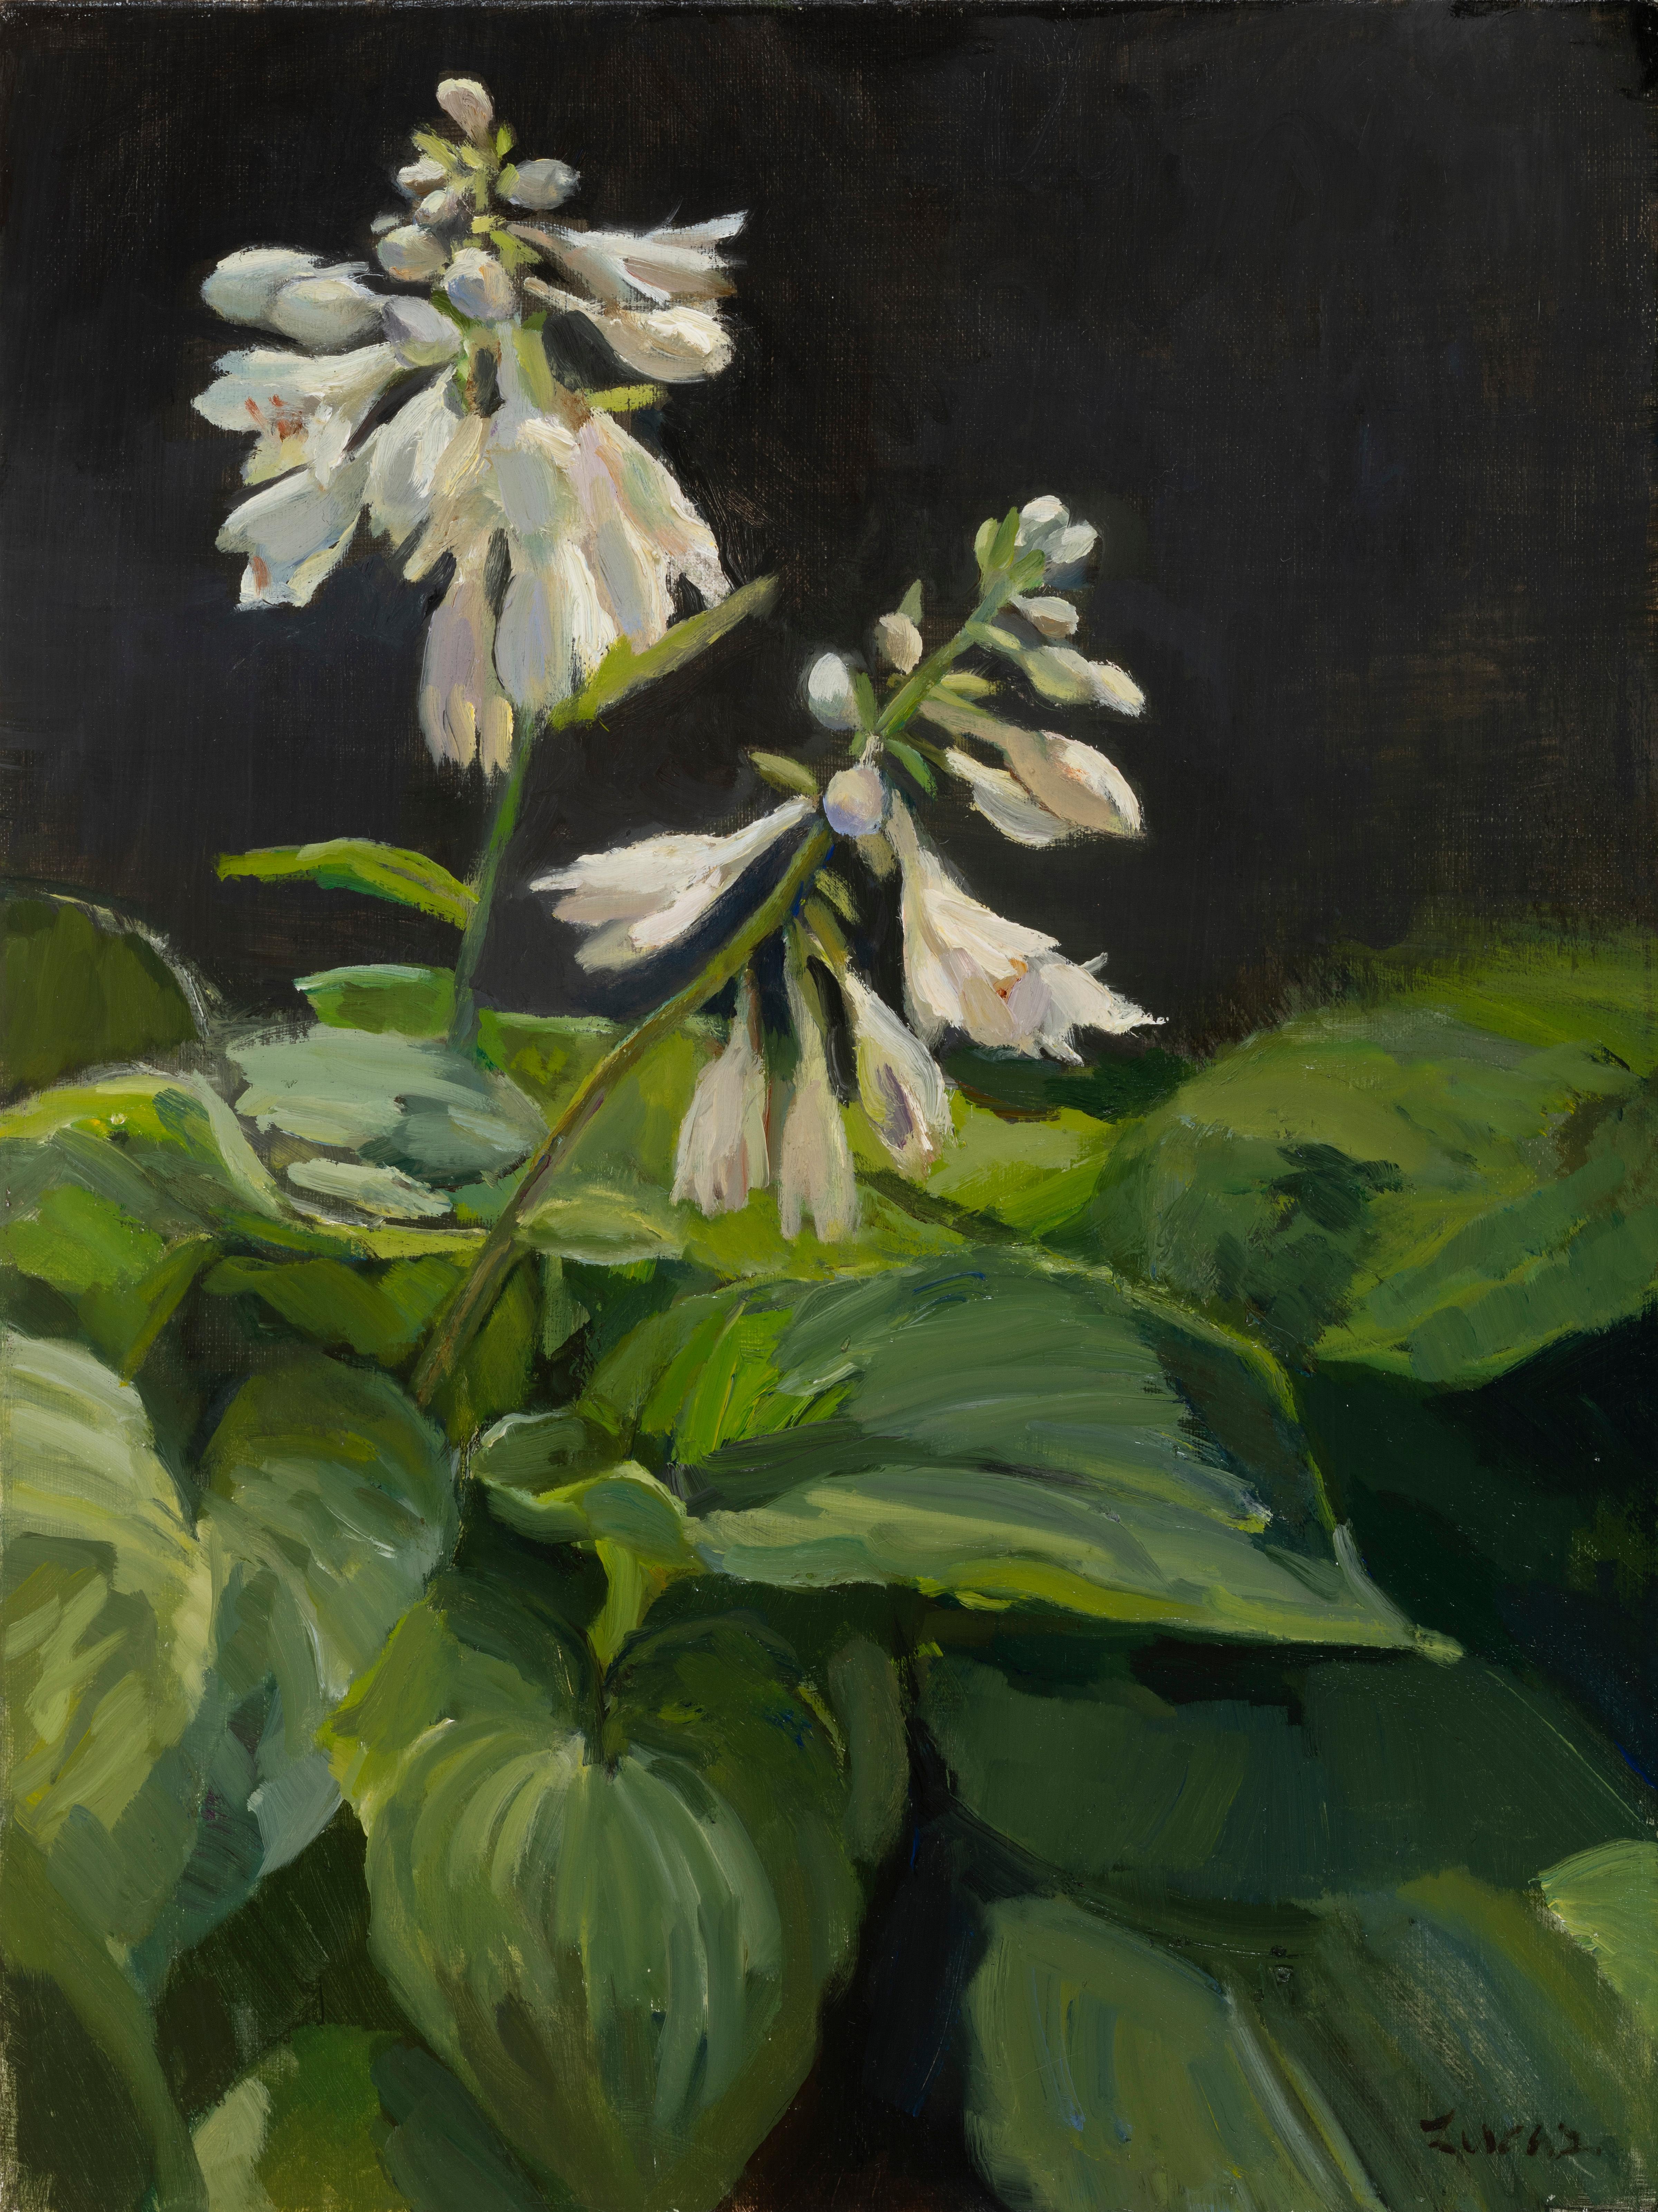 "Glow Up" contemporary realist white flowers & green leaves on black background